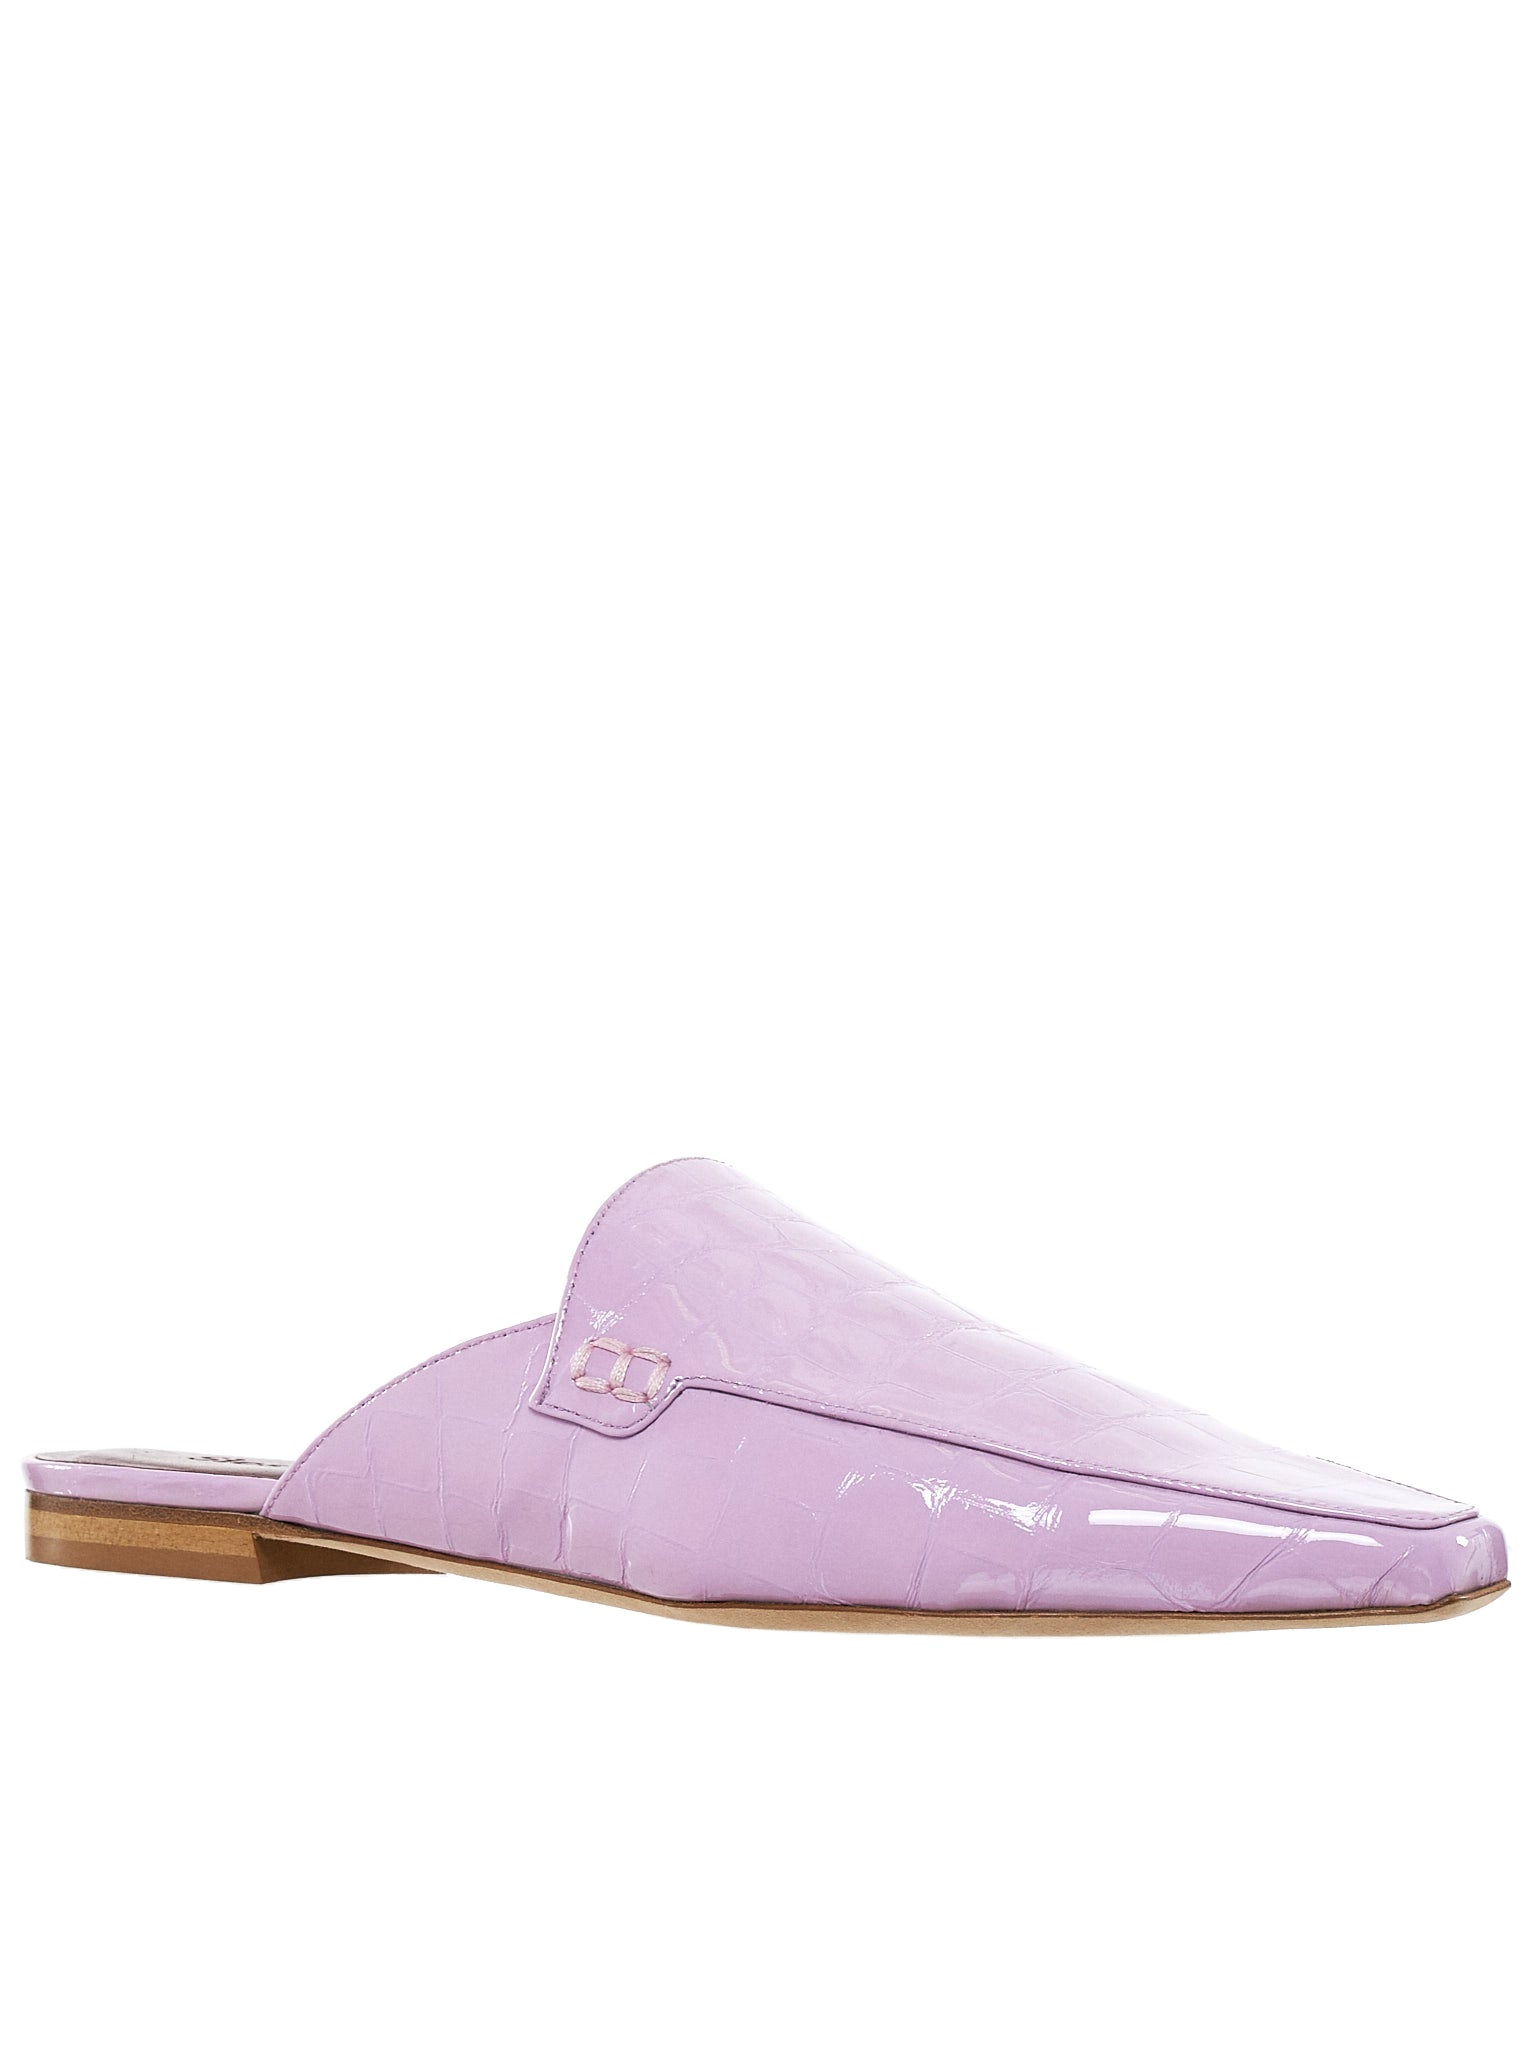 Patent Leather Mule (10SCP219-SOFT-PINK)